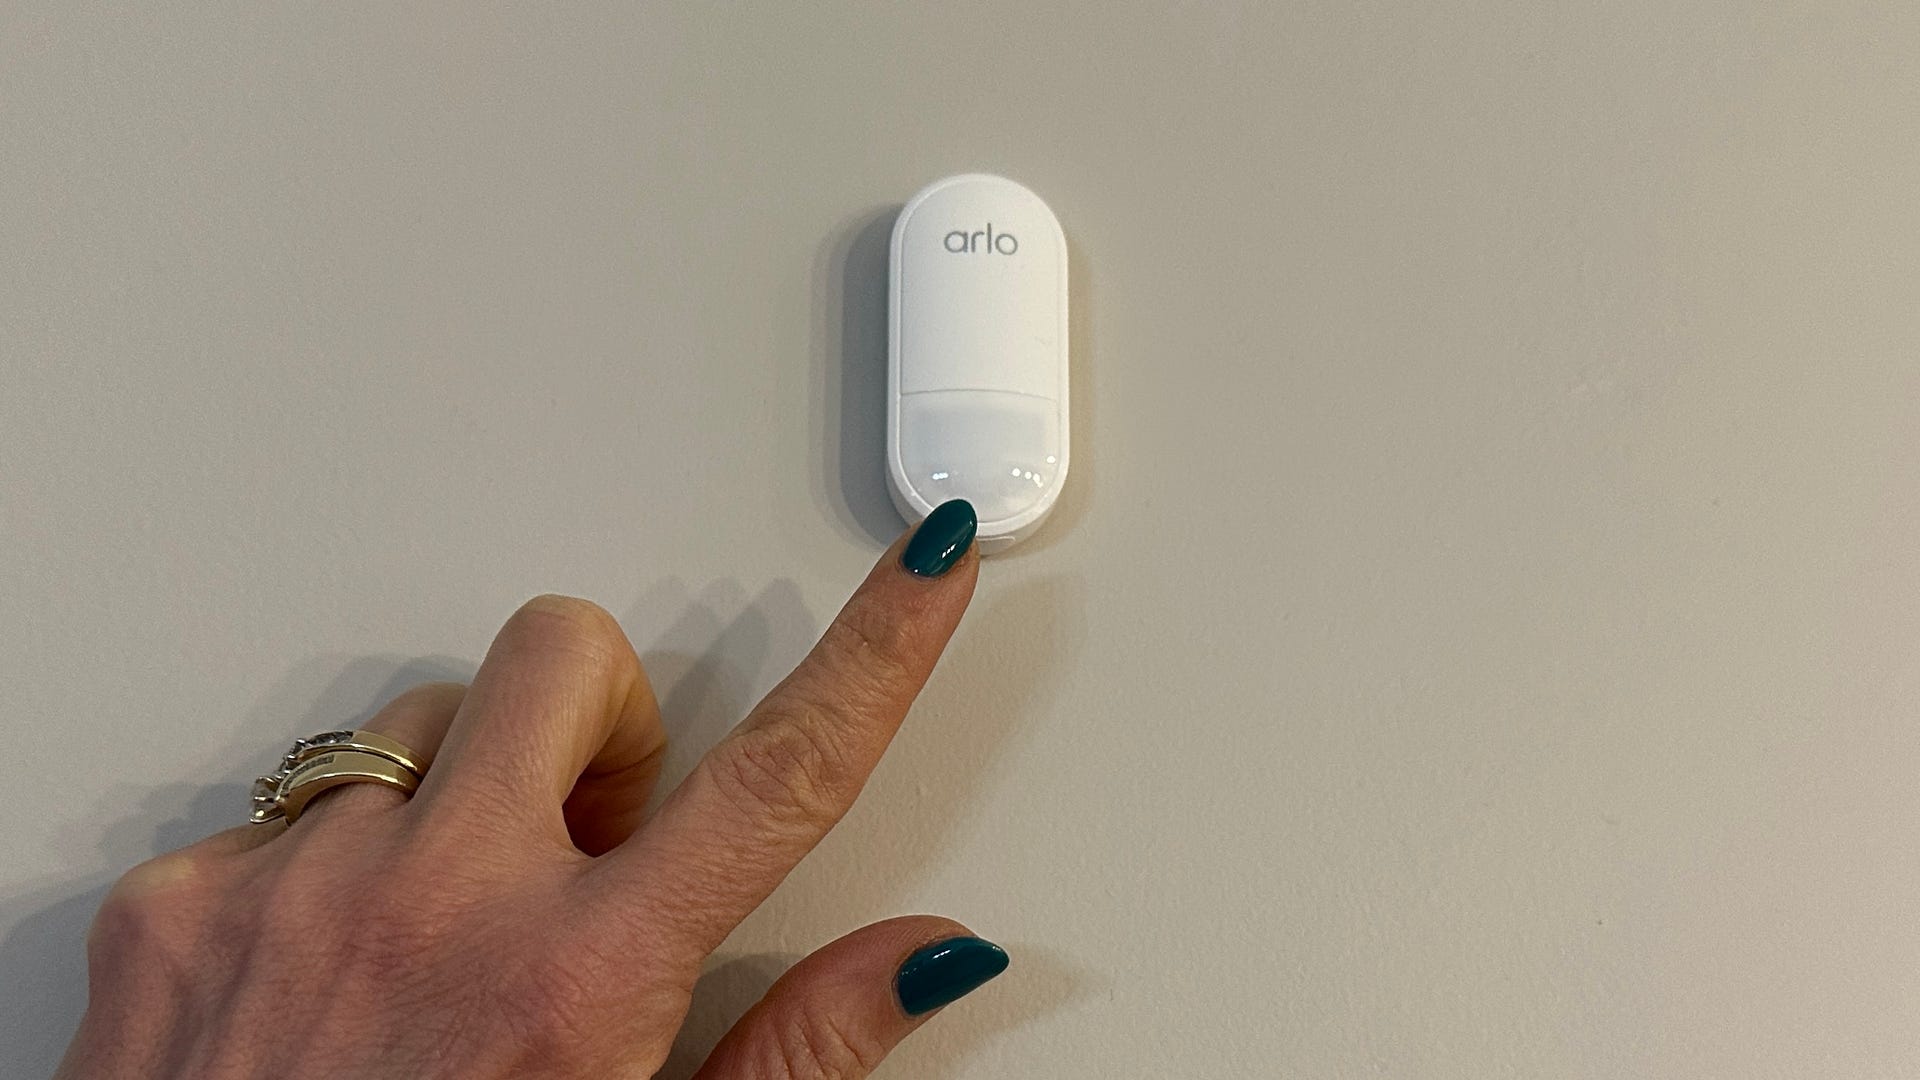 A multi-sensor for the Arlo Home Security System placed against a wall to track motion, temperature, and ambient light. It can also track door or window openings, listen for the sound of smoke or CO alarms, or monitor for leaks.